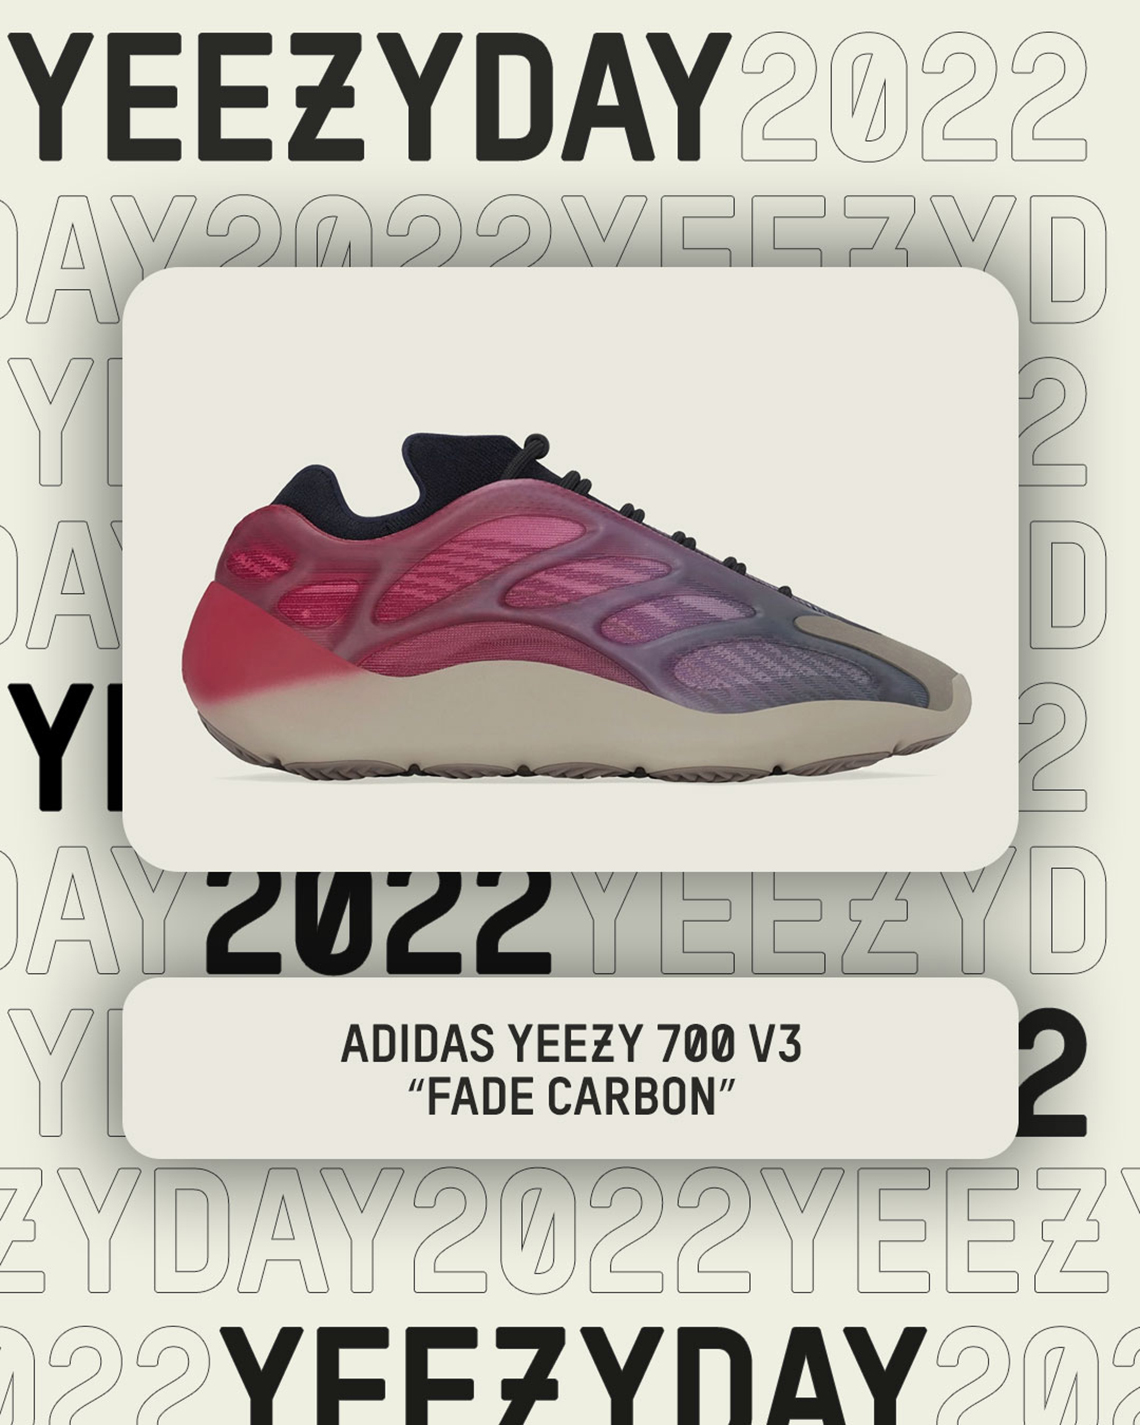 Yeezy Day 2022 Yeezy 700 V3 Fade Carbon 1